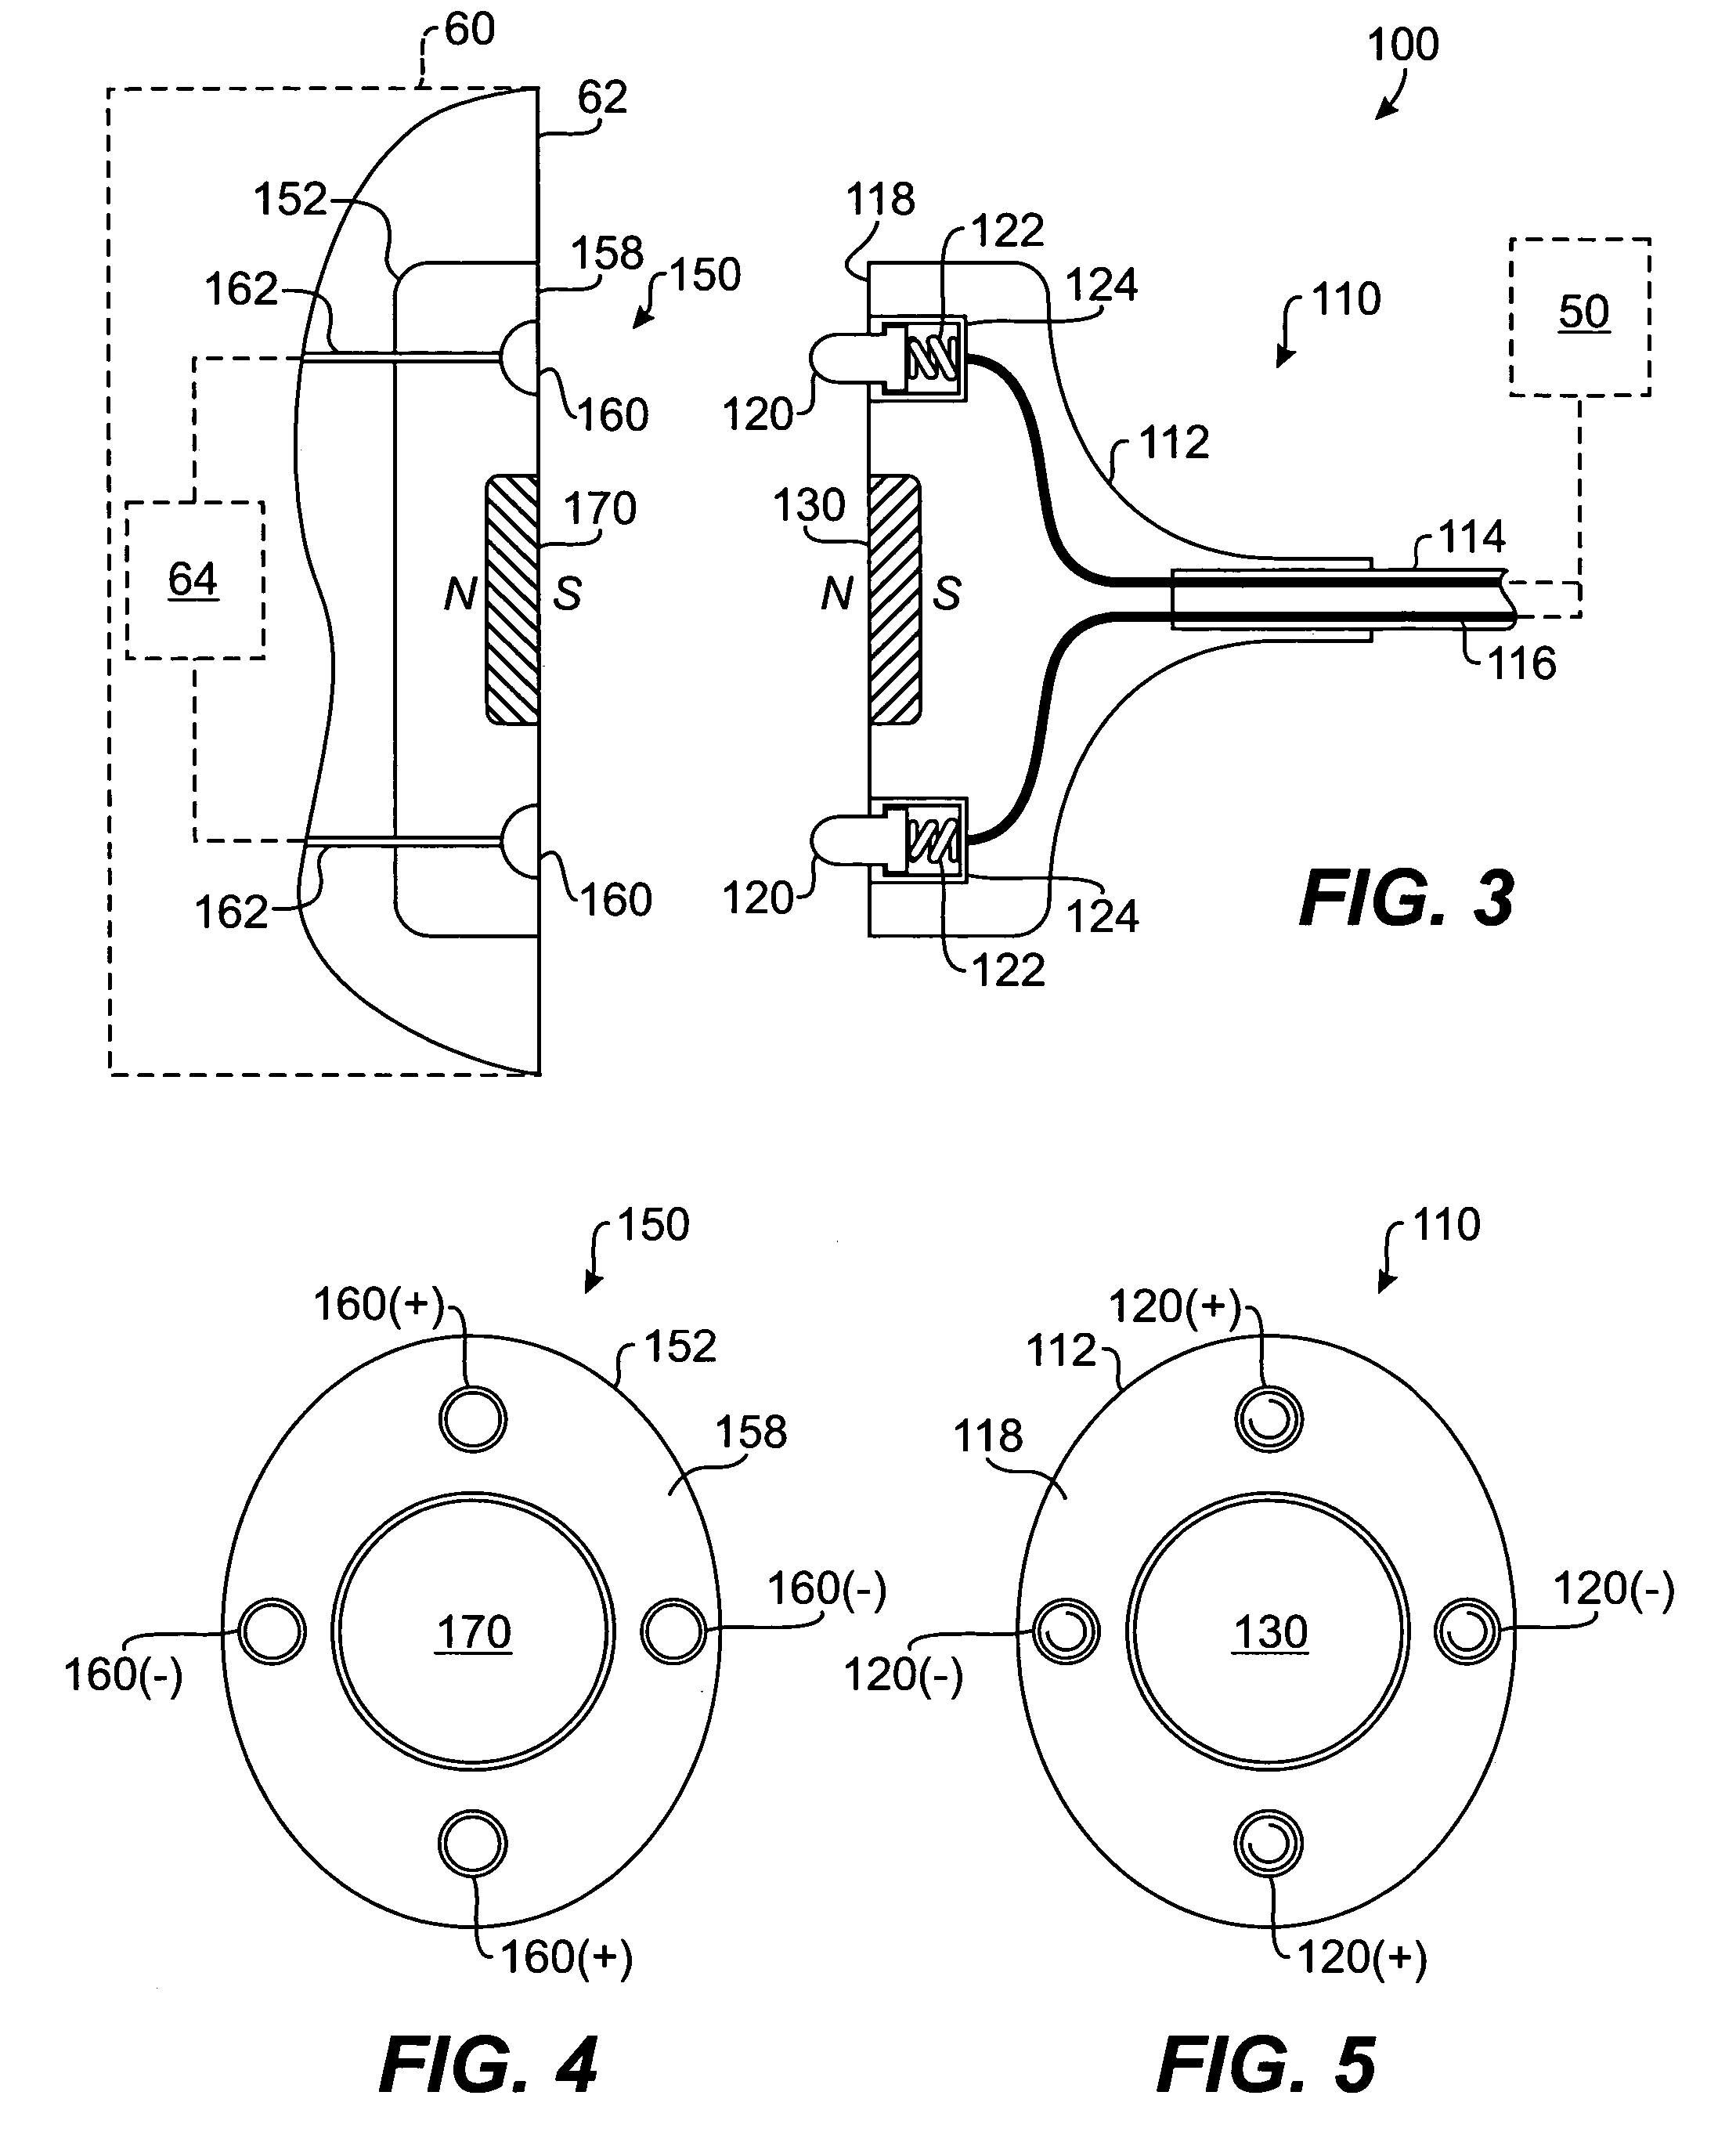 Electromagnetic connector for electronic device